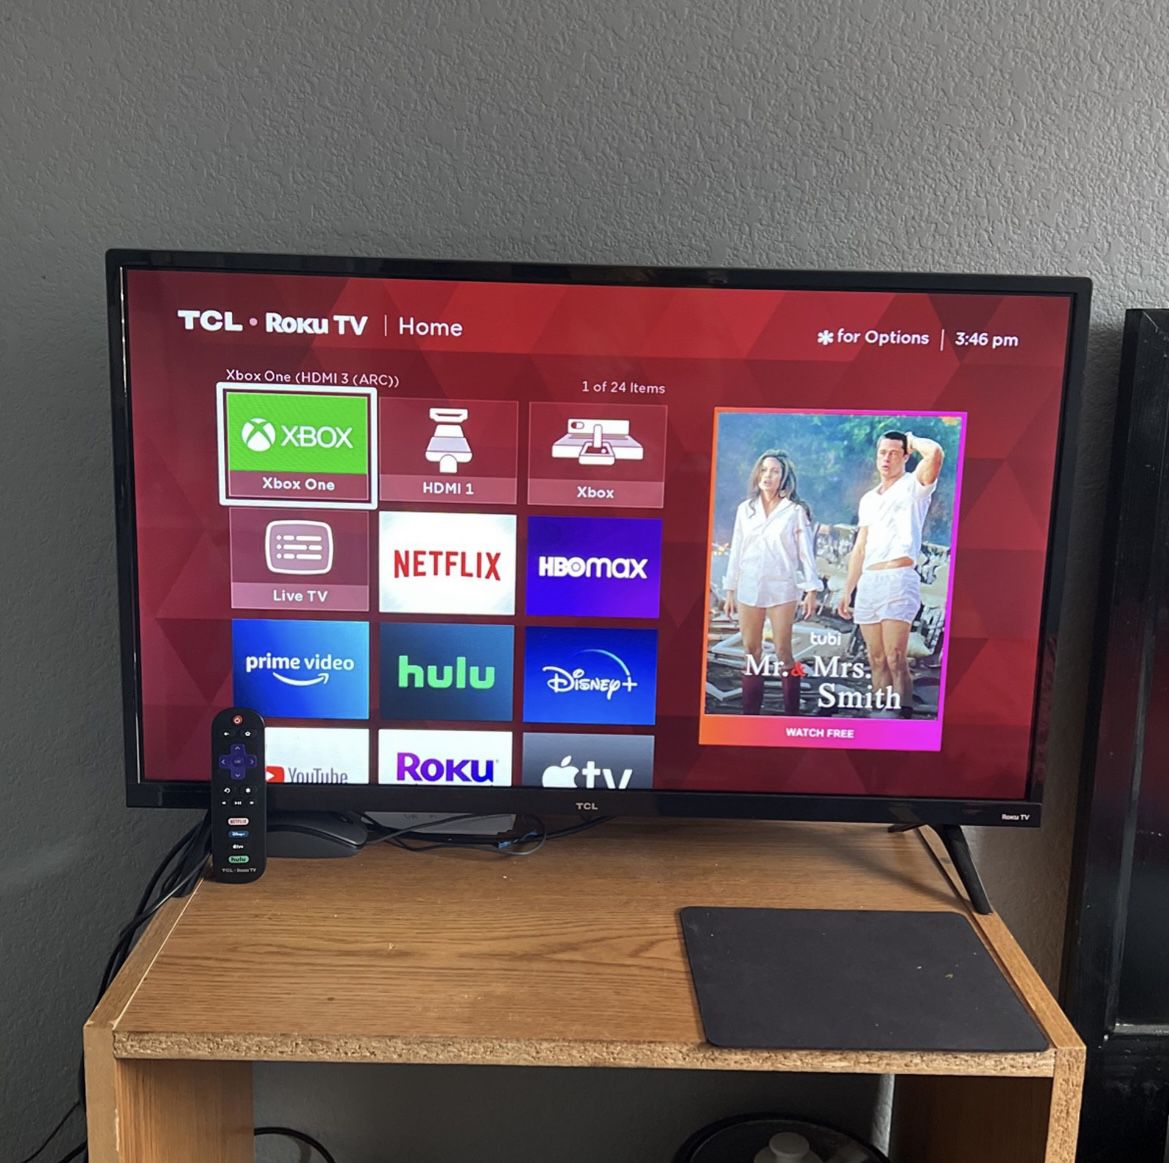 (NEED GONE TODAY) TCL 32” Roku TV No Remote 